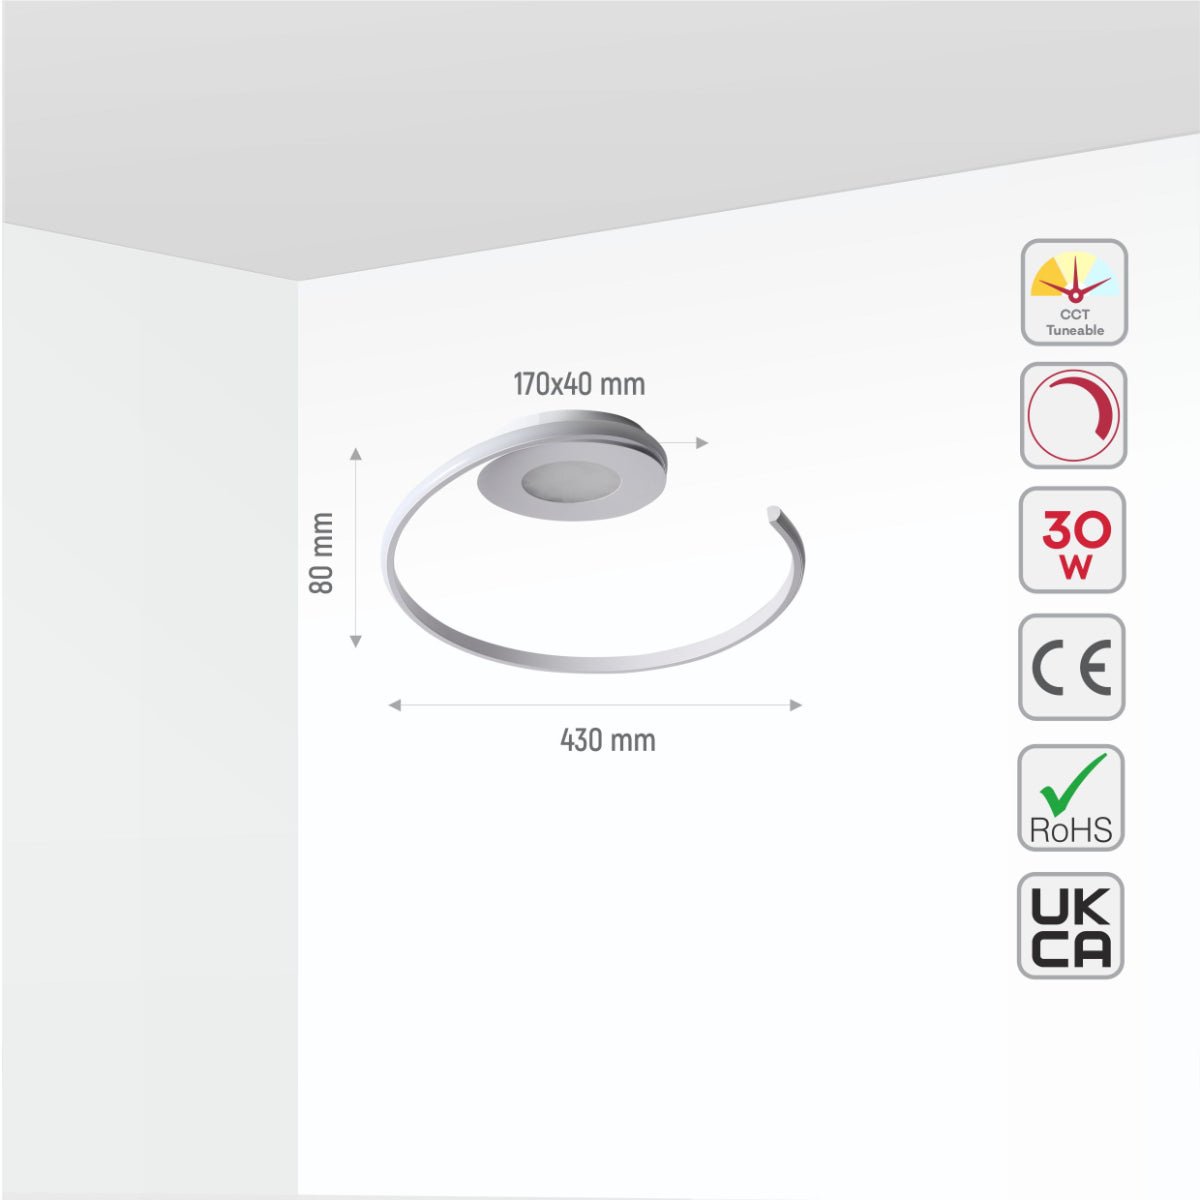 Size and specs of LED Spiral White Finishing 30W CCT Change Dimmable Contemporary Nordic Scandinavian Flush Ceiling Light with Remote Control | TEKLED 154-17266